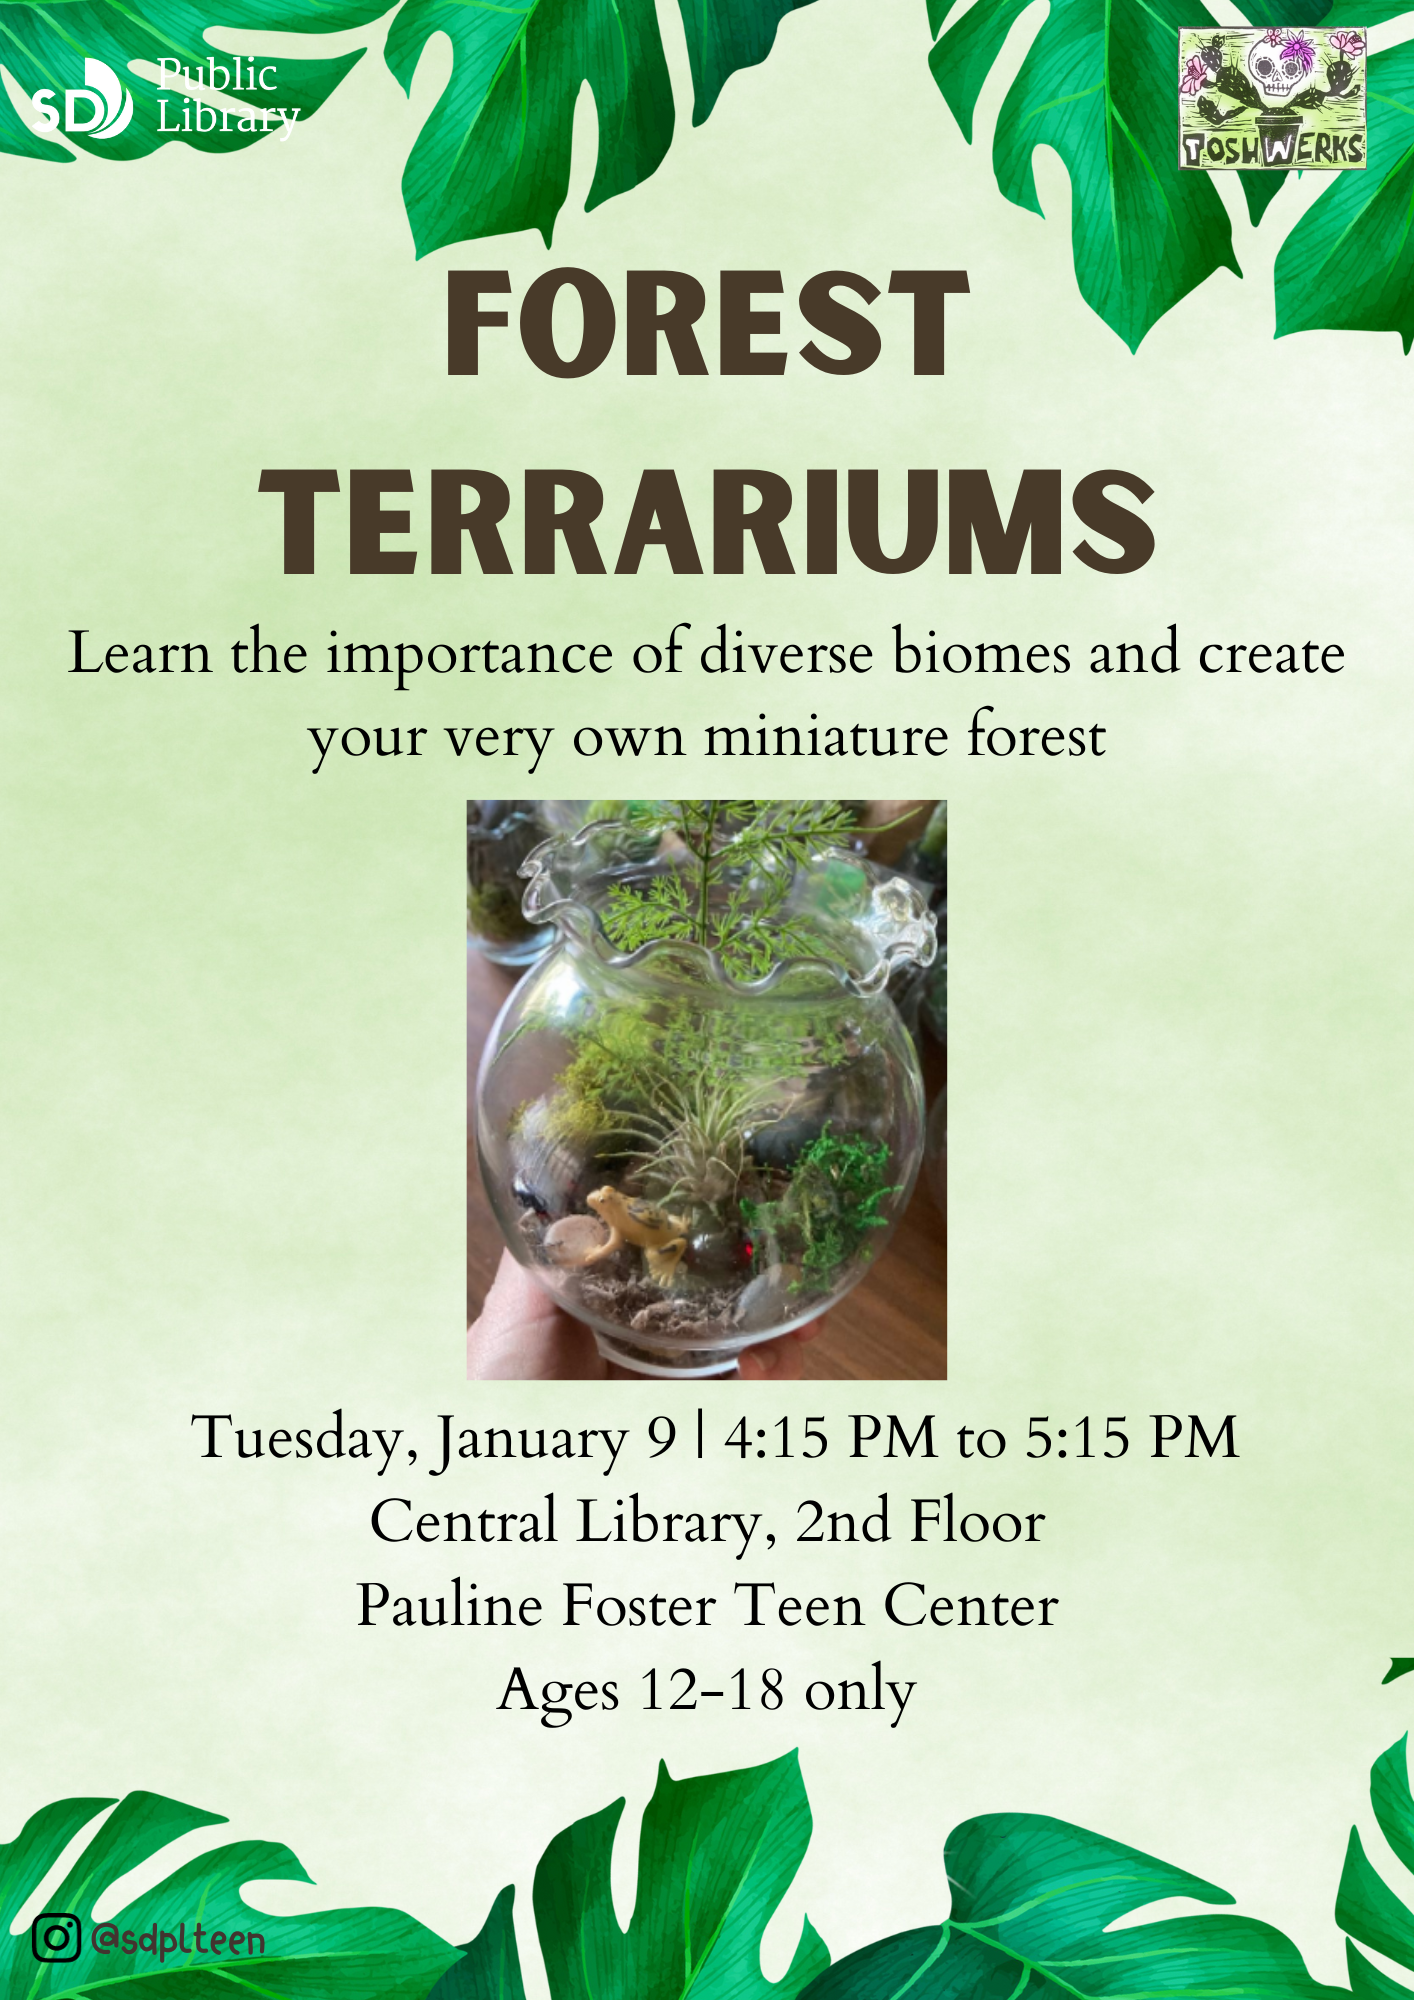 Forest Terrariums. Learn the importance of diverse biomes and create your very own miniature forest. Tuesday, January 9, 4:15 PM to 5:15 PM. Central Library, 2nd Floor Pauline Foster Teen Center. Ages 12-18 only